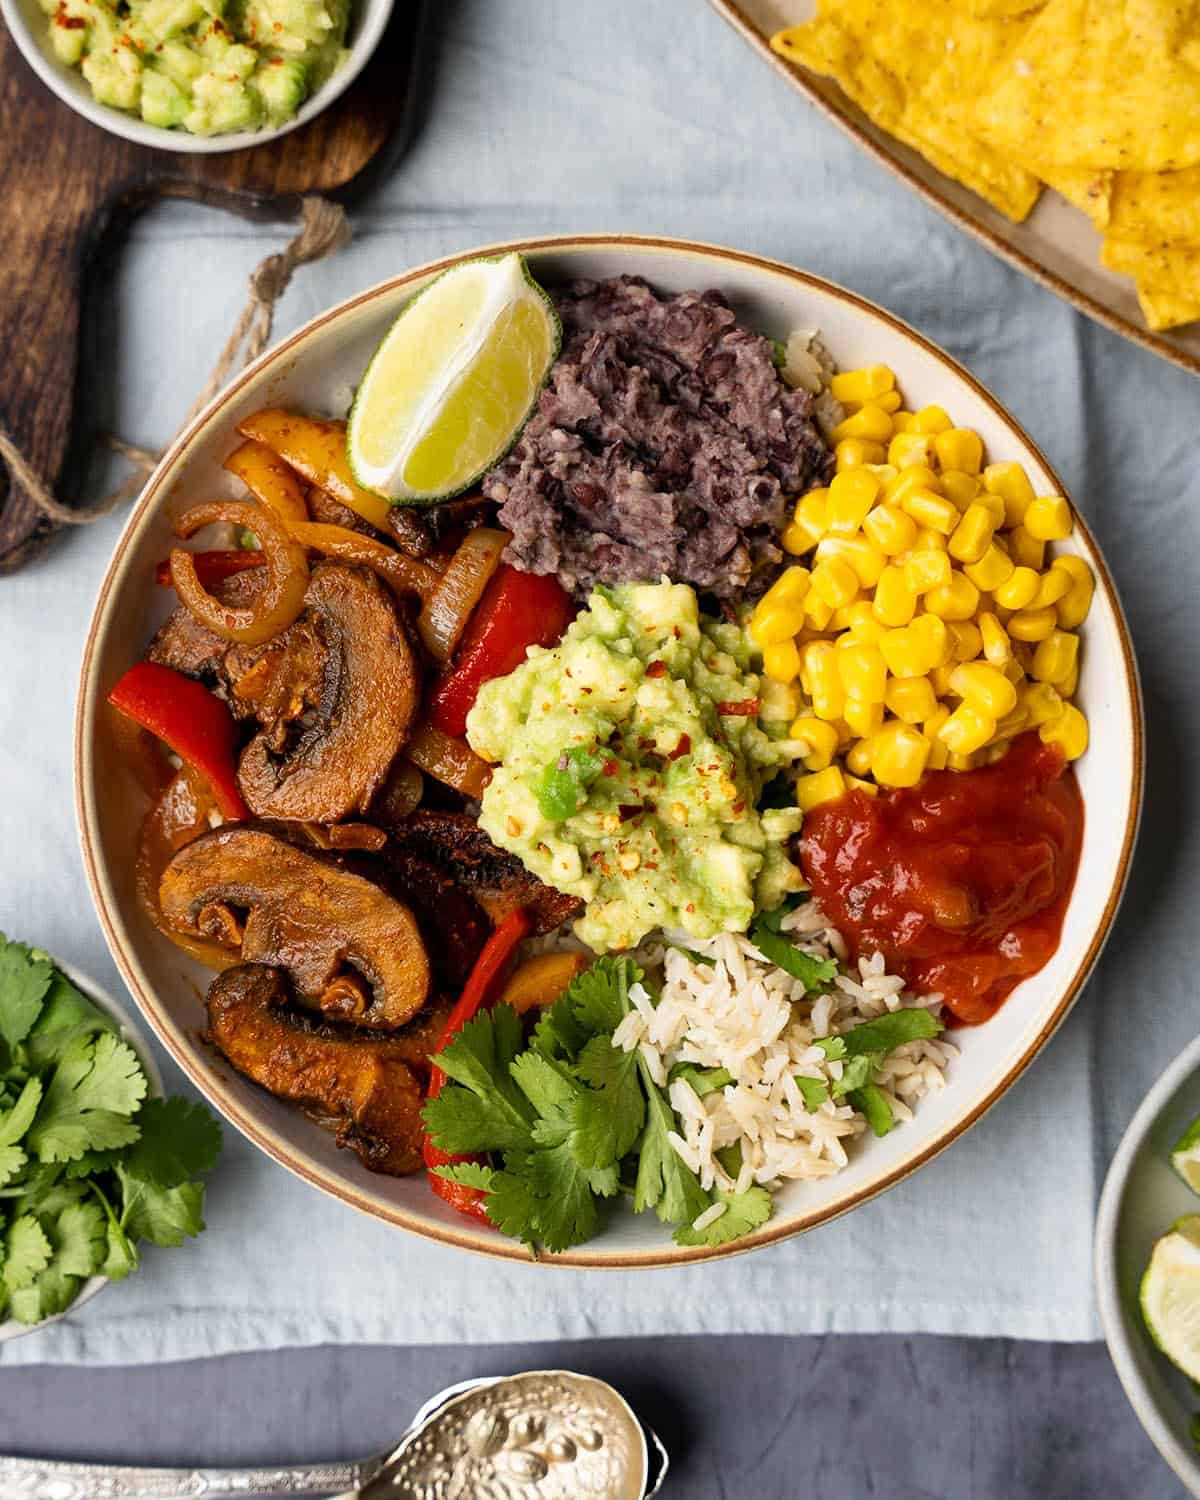 Mexican Buddha bowl served with a lime wedge, avocado and tortilla chips.